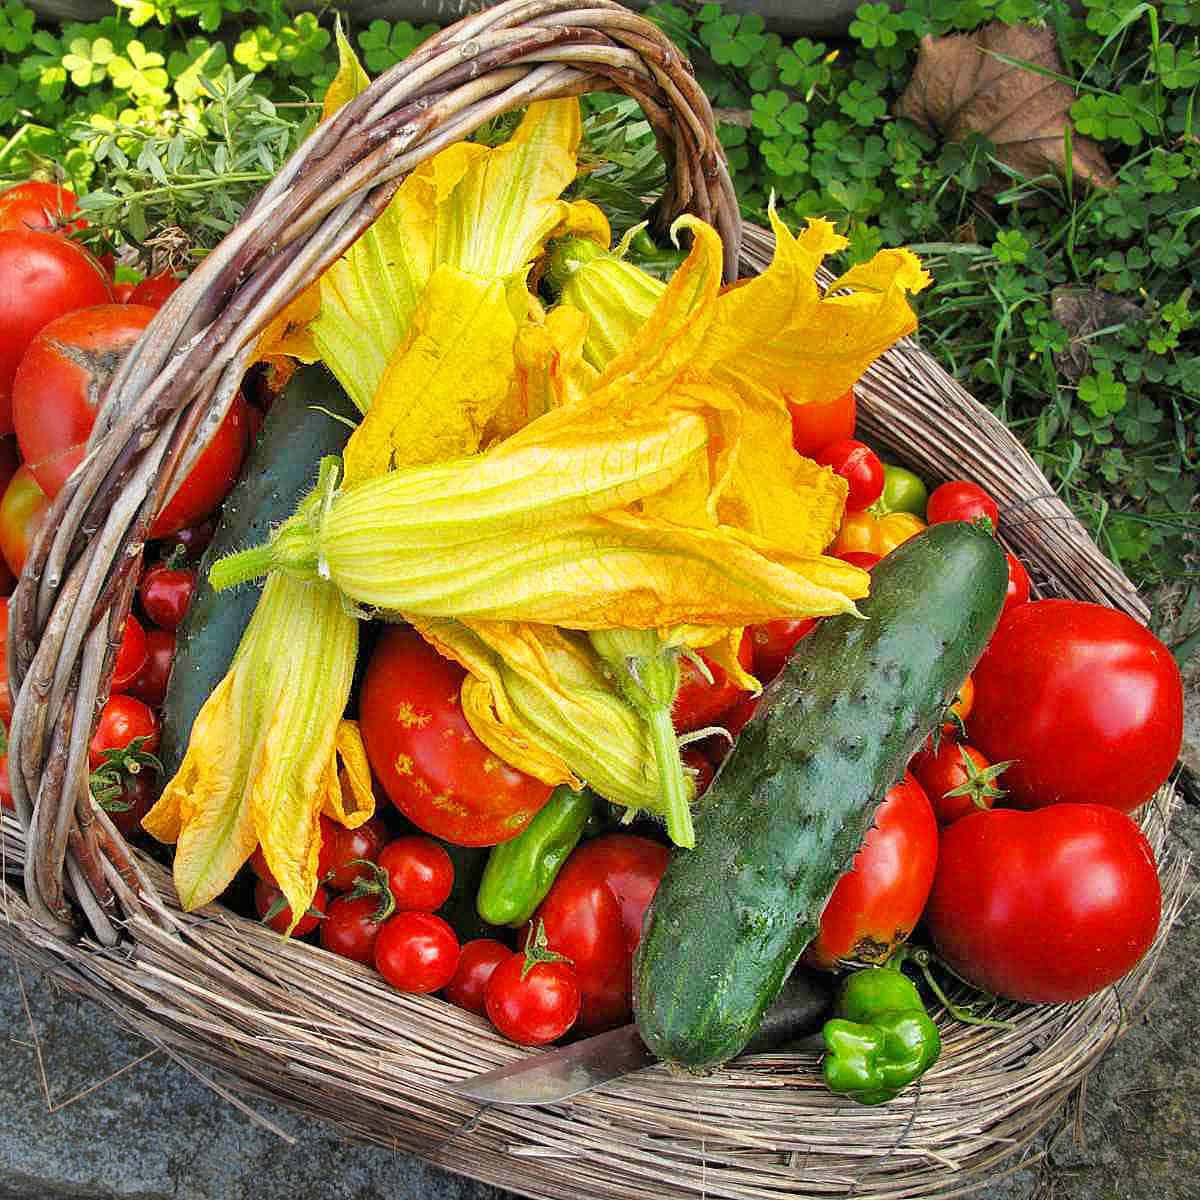 A garden basket filled with cucumbers, peppers, tomatoes and yellow squash blossoms.